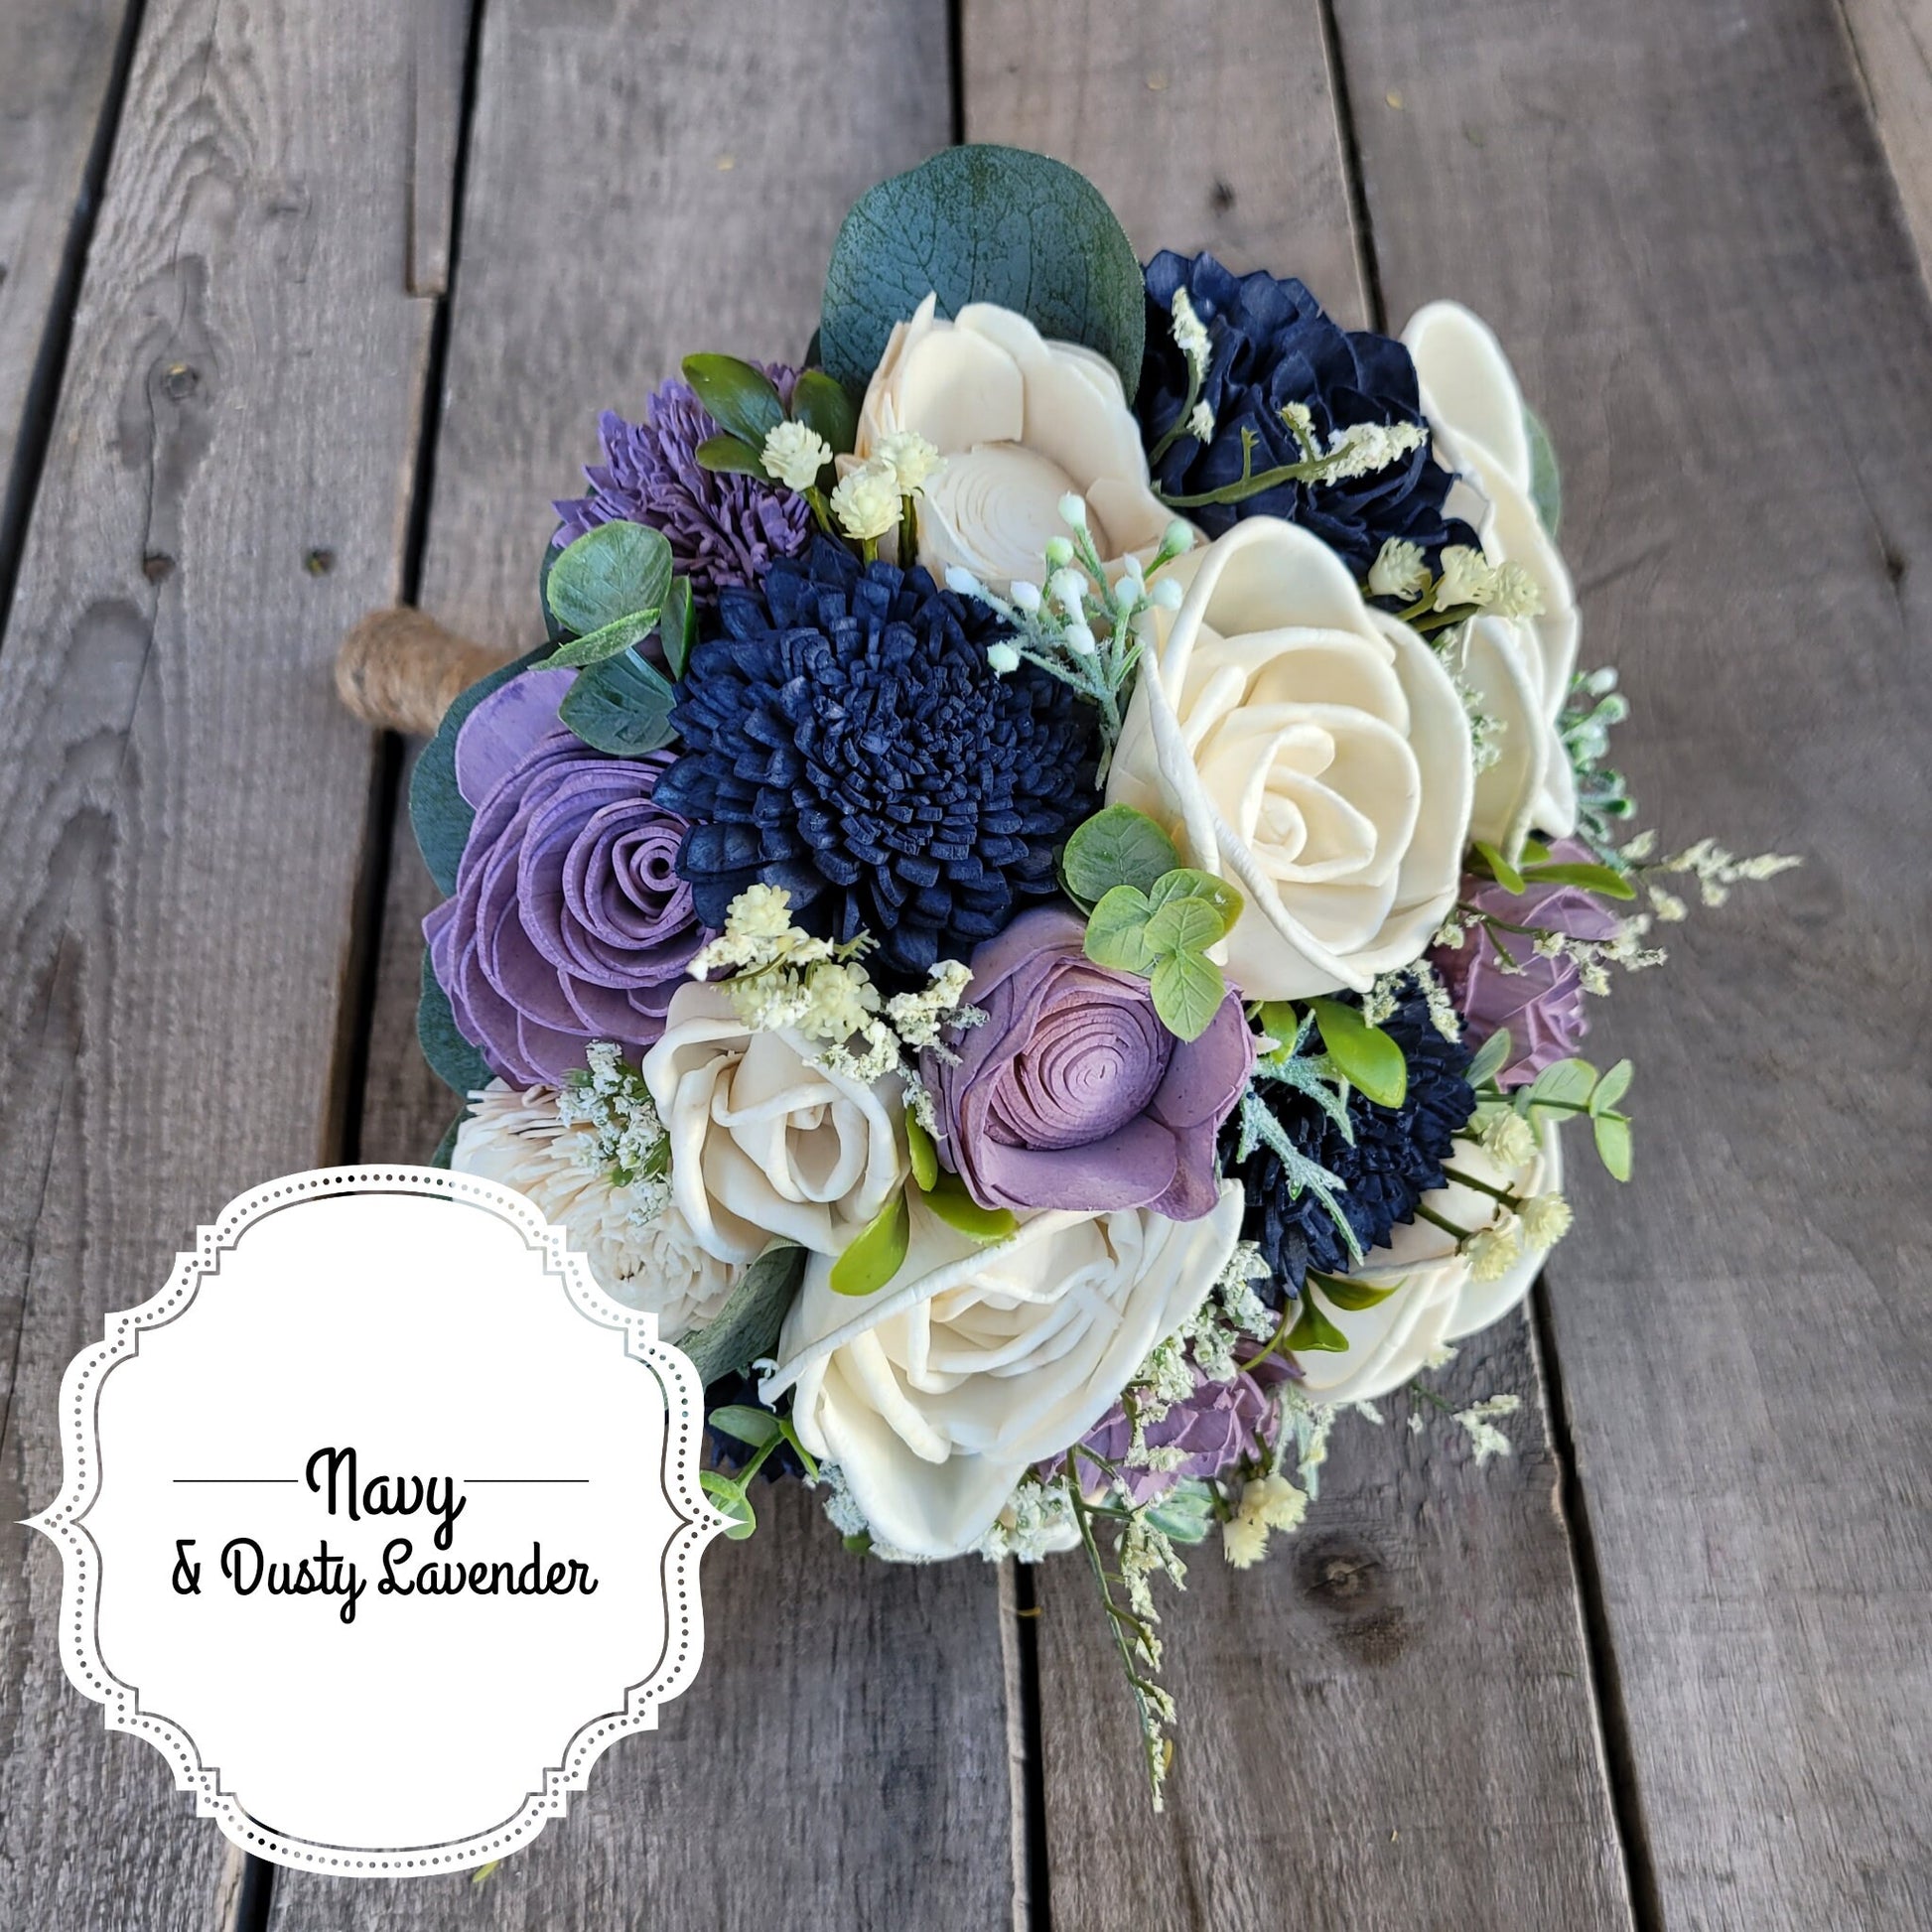 DIY Bouquet Kit with Wood Flowers and Color Options